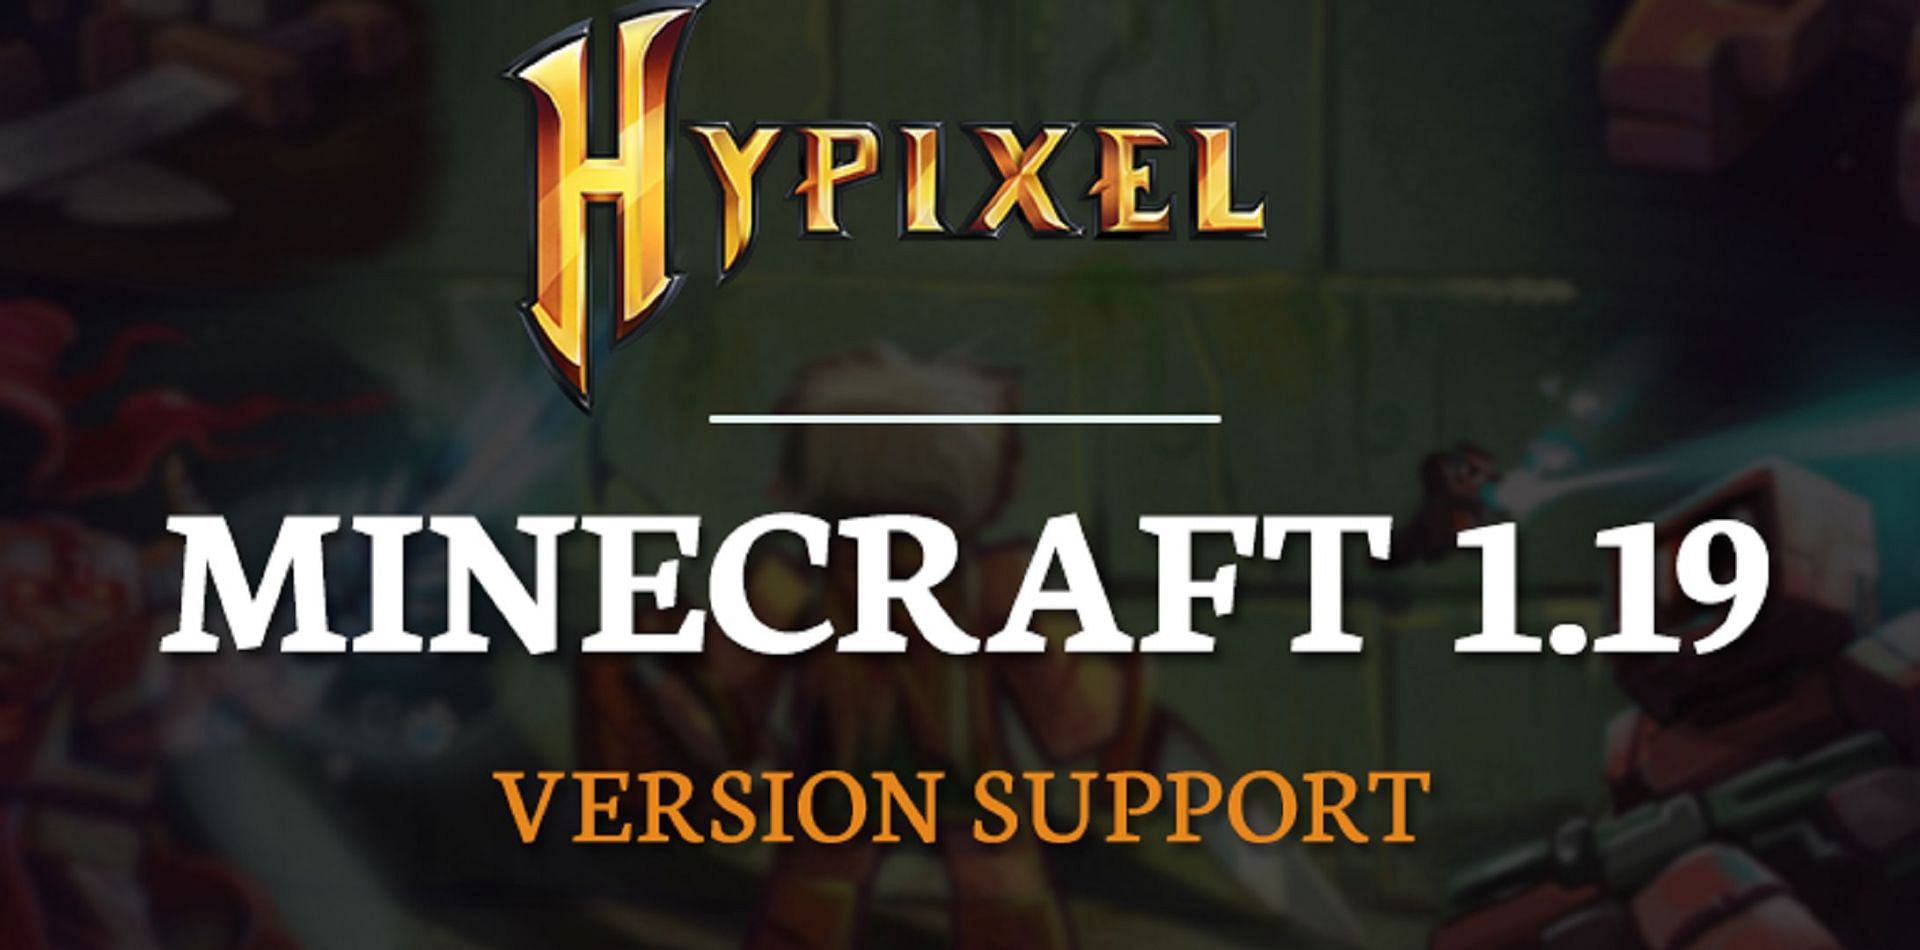 Hypixel remains one of the most popular servers ever conceived (Image via Hypixel)